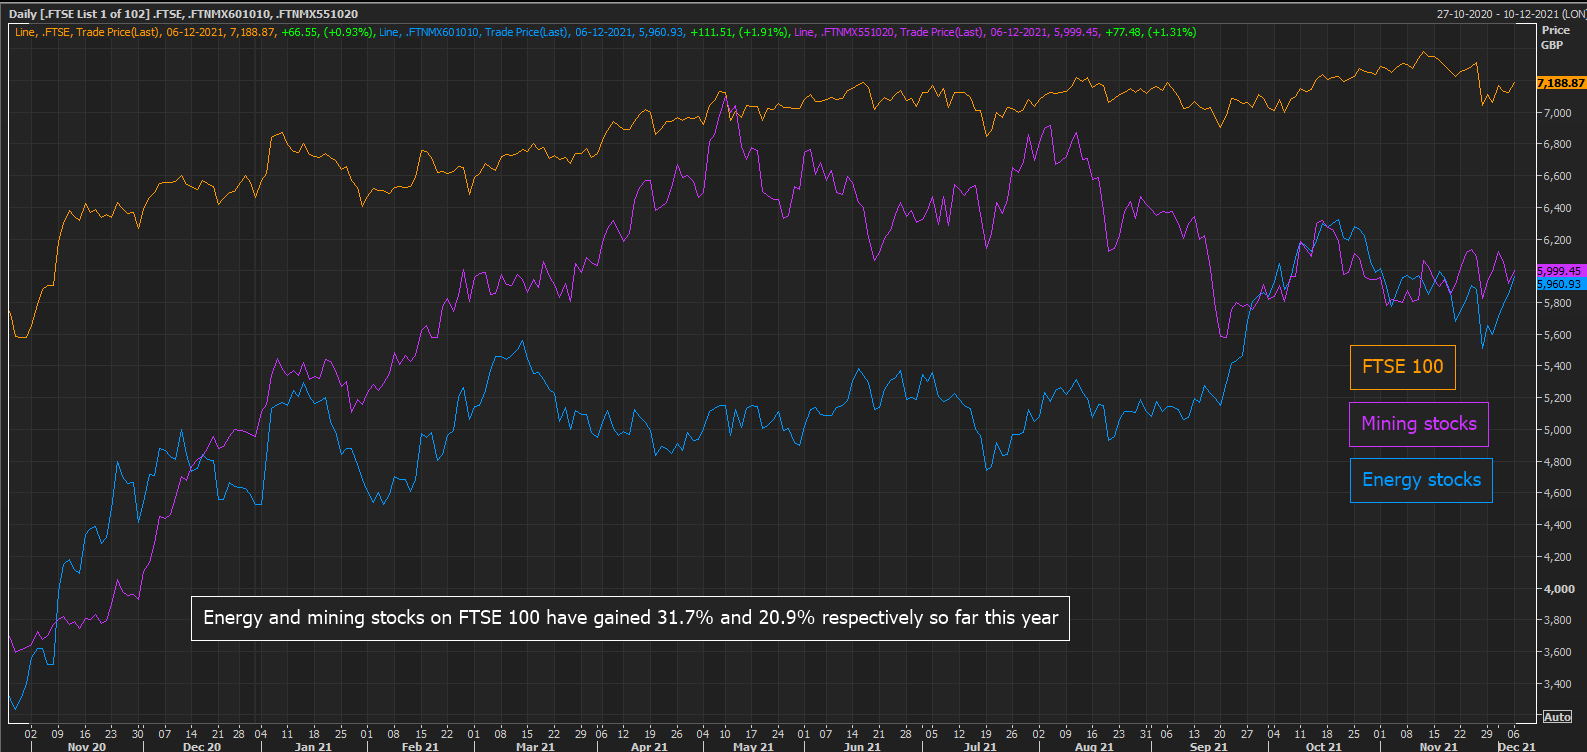 FTSE 100 has gained 11.2% YTD